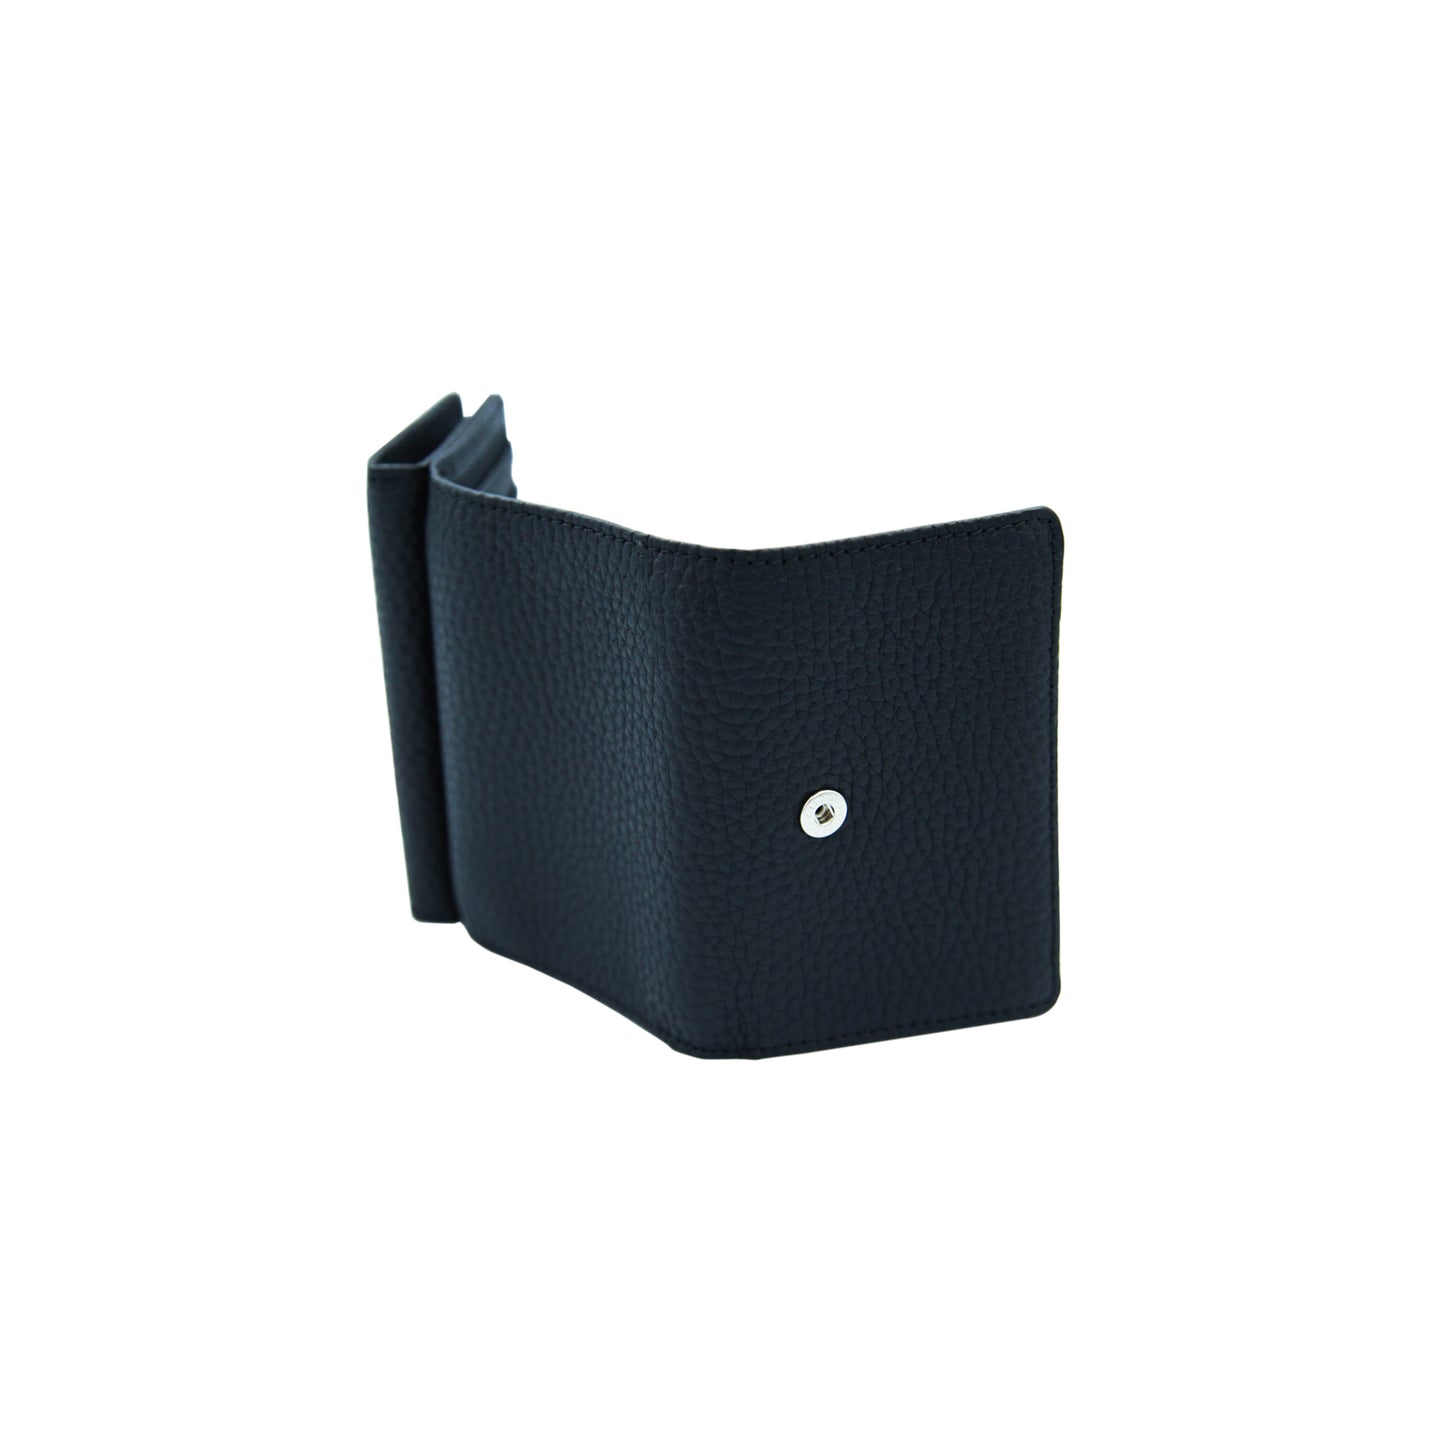 Small Wallet Type4